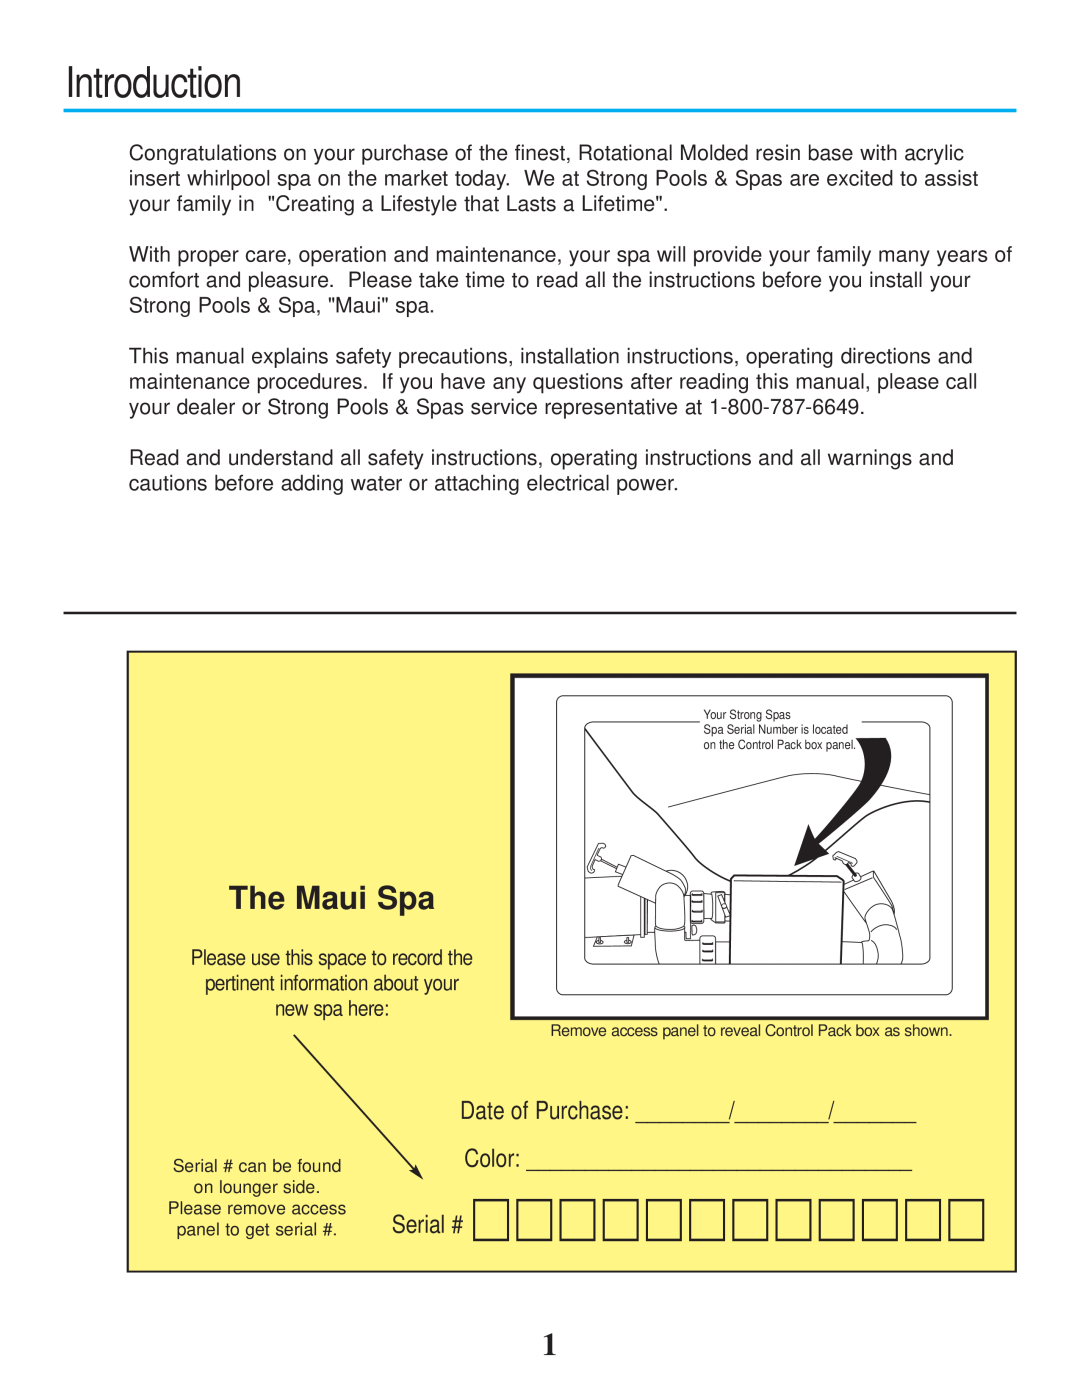 Strong Pools and Spas owner manual Introduction, The Maui Spa, Color Serial #, Date of Purchase 